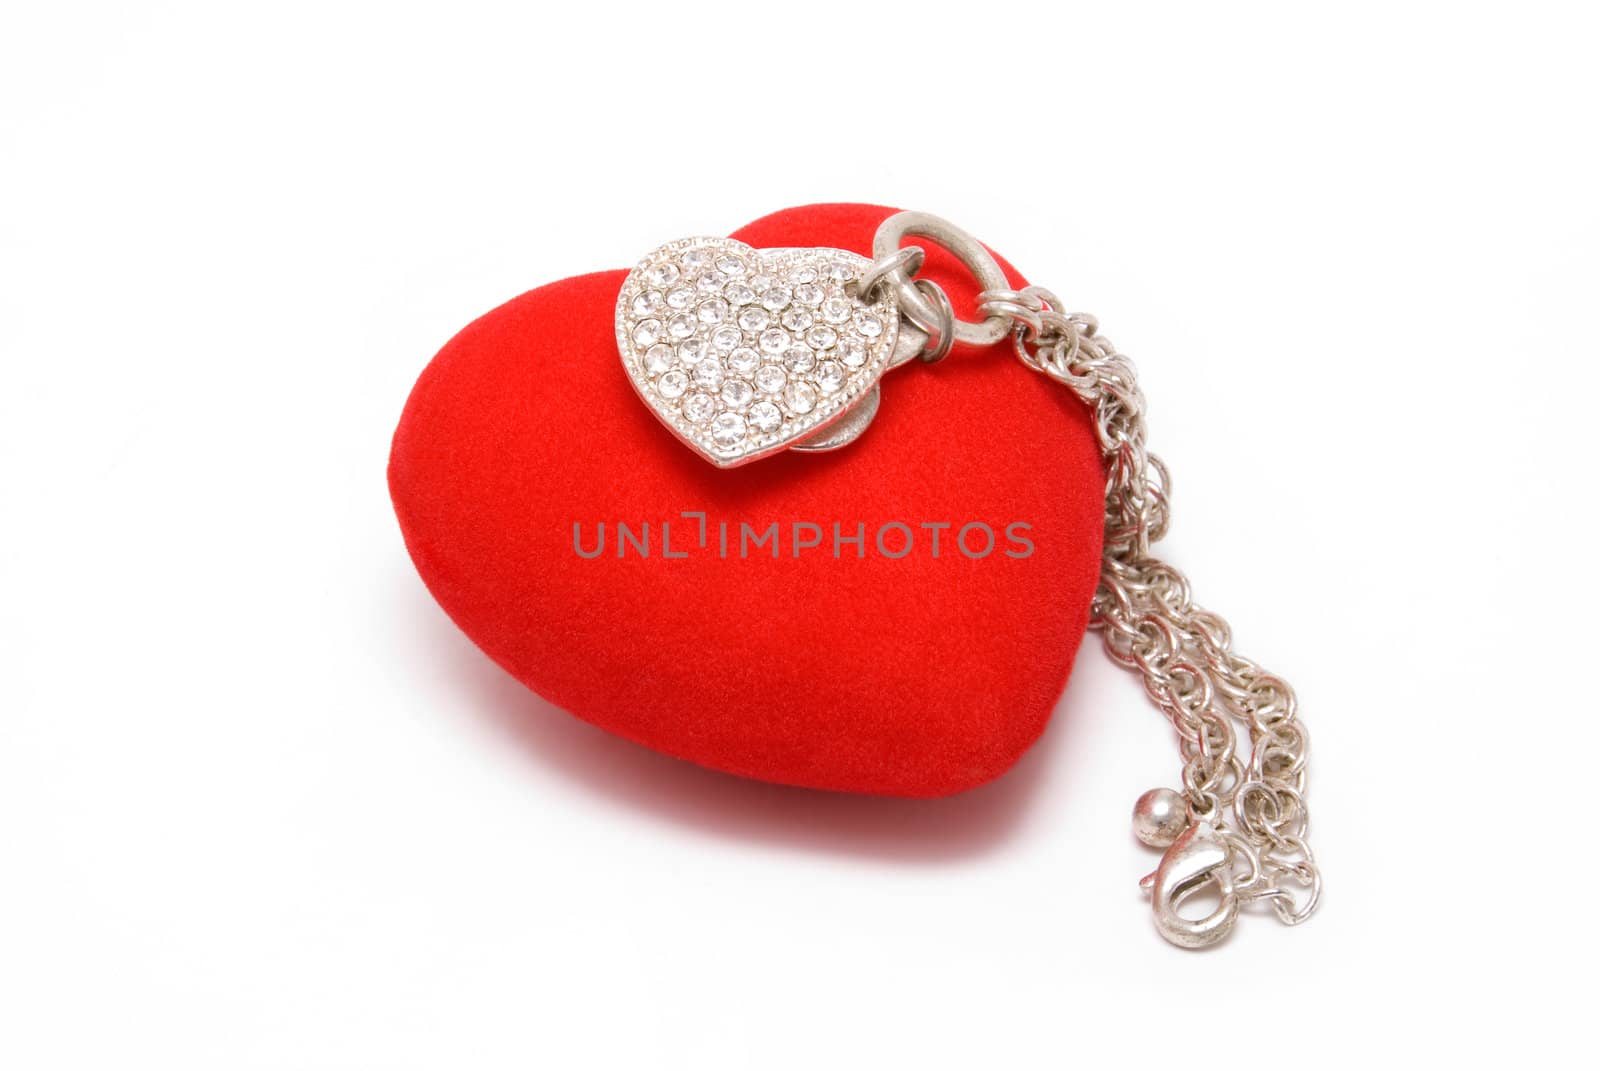 The silver chain with pendant as heart lays on red velvet heart